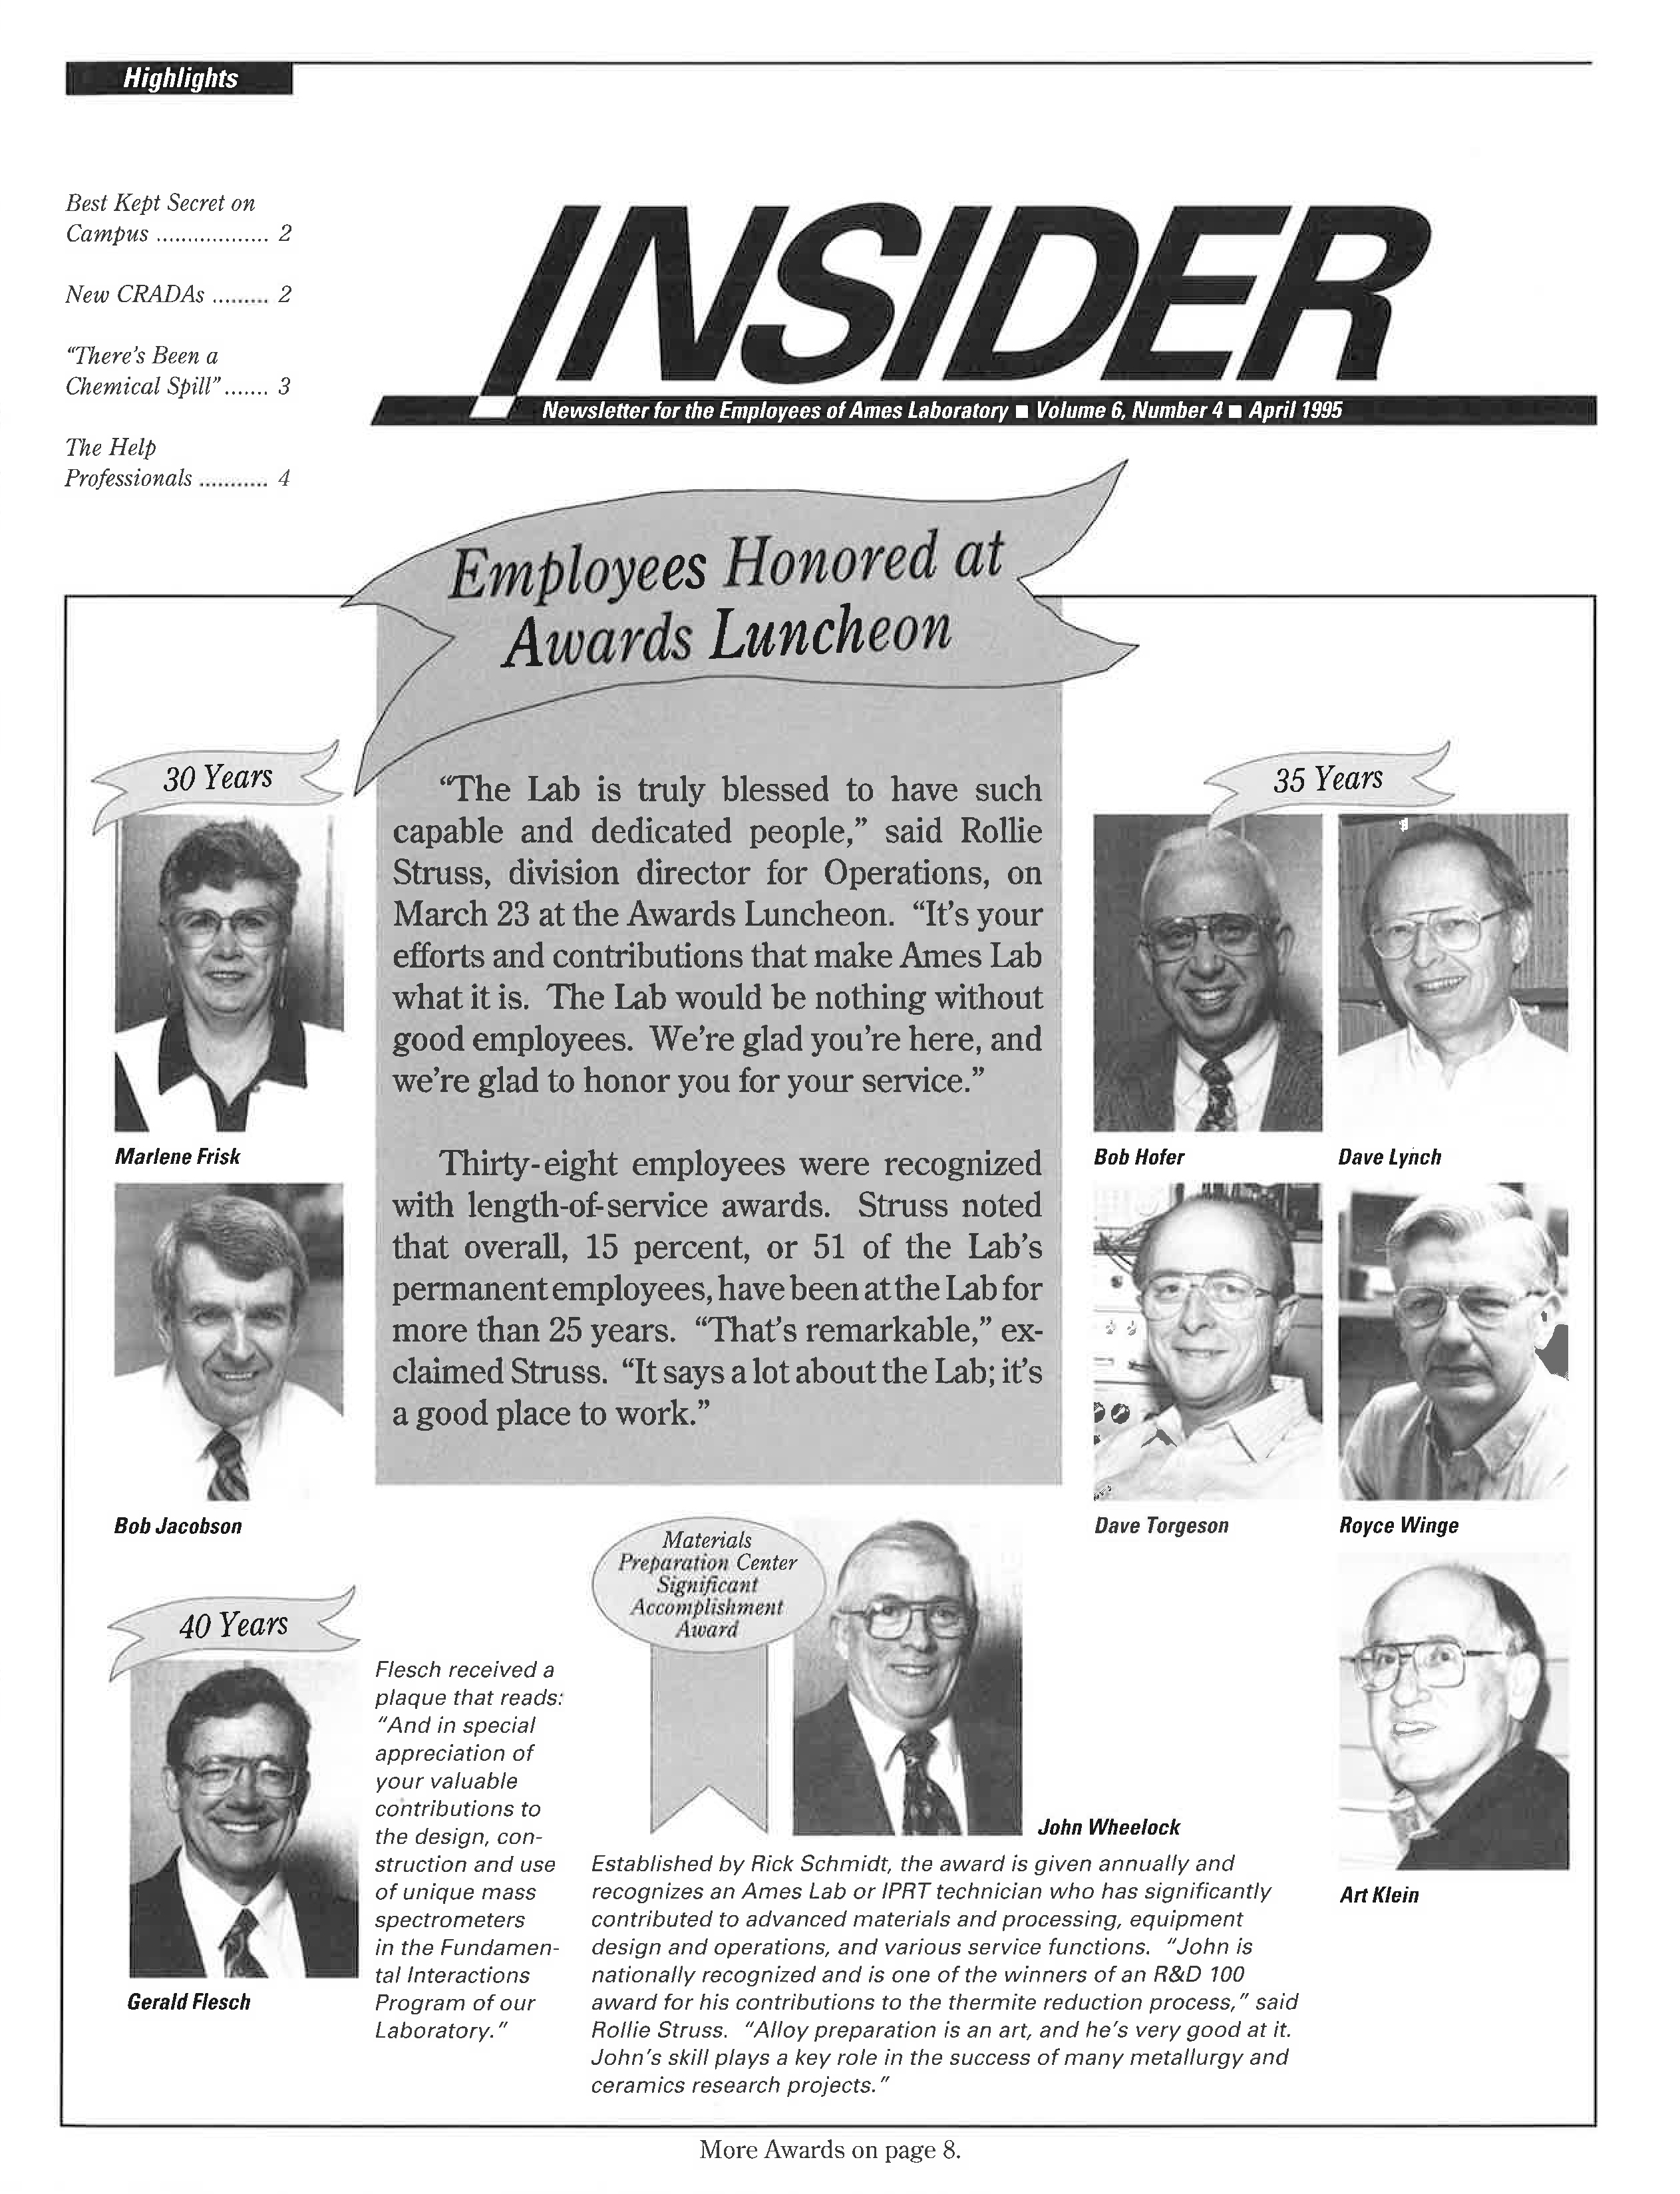 Cover of April 1995 Insider